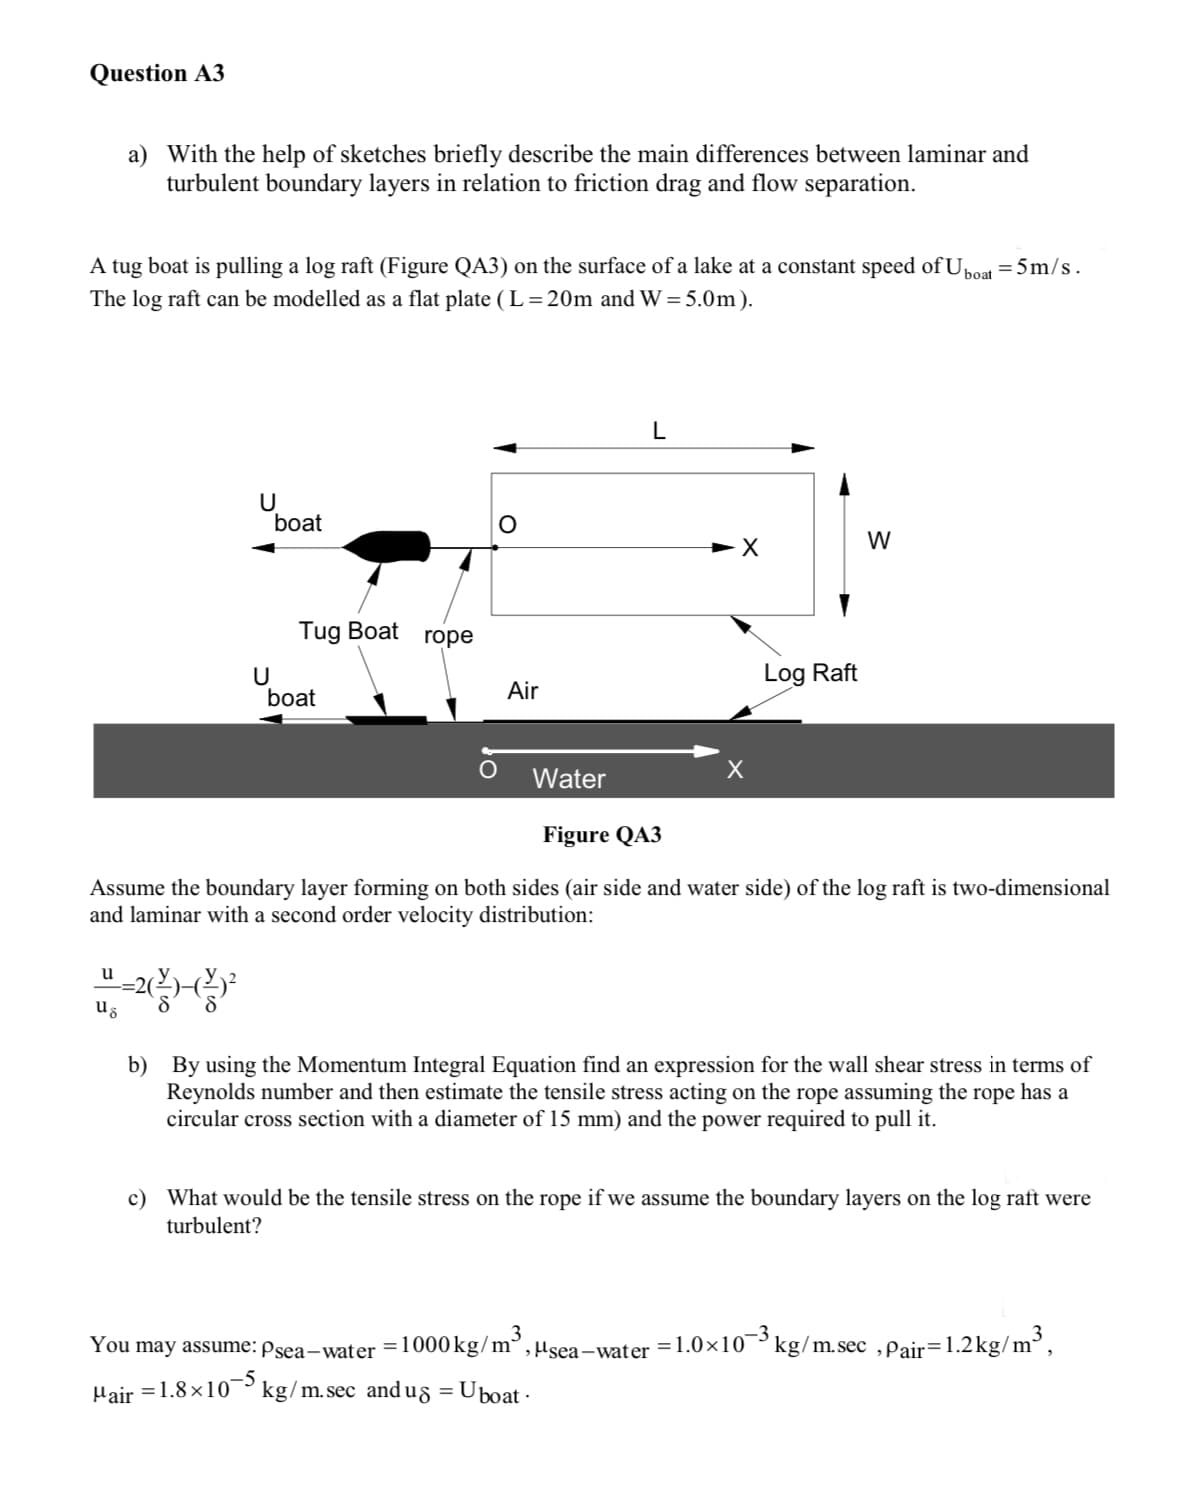 Question A3
a) With the help of sketches briefly describe the main differences between laminar and
turbulent boundary layers in relation to friction drag and flow separation.
A tug boat is pulling a log raft (Figure QA3) on the surface of a lake at a constant speed of Uboat = 5m/s.
The log raft can be modelled as a flat plate (L=20m and W = 5.0m).
u
ug
U
boat
8
U
Tug Boat rope
boat
Air
Water
L
-X
Log Raft
Figure QA3
Assume the boundary layer forming on both sides (air side and water side) of the log raft is two-dimensional
and laminar with a second order velocity distribution:
W
b) By using the Momentum Integral Equation find an expression for the wall shear stress in terms of
Reynolds number and then estimate the tensile stress acting on the rope assuming the rope has a
circular cross section with a diameter of 15 mm) and the power required to pull it.
c) What would be the tensile stress on the rope if we assume the boundary layers on the log raft were
turbulent?
You may assume: Psea-water = 1000 kg/m³,"sea-water -1.0×10-3kg/m.sec,Pair=1.2kg/m³,
Hair = 1.8×10-5 kg/m.sec_andug = Uboat-